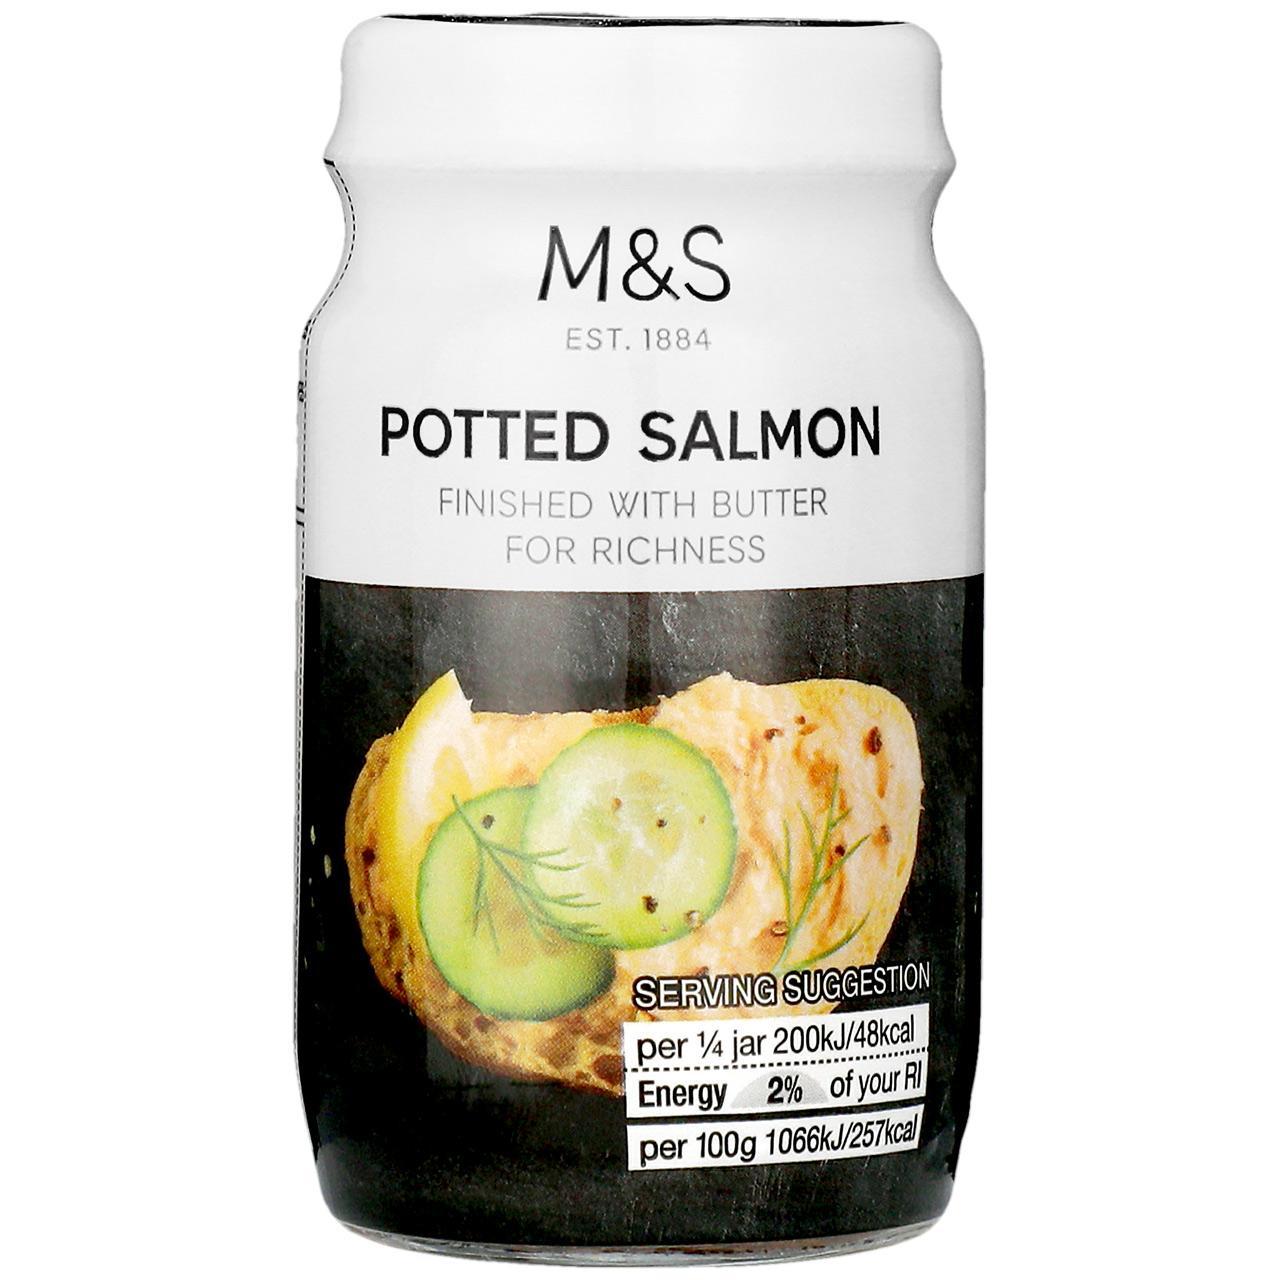 M&S Potted Salmon